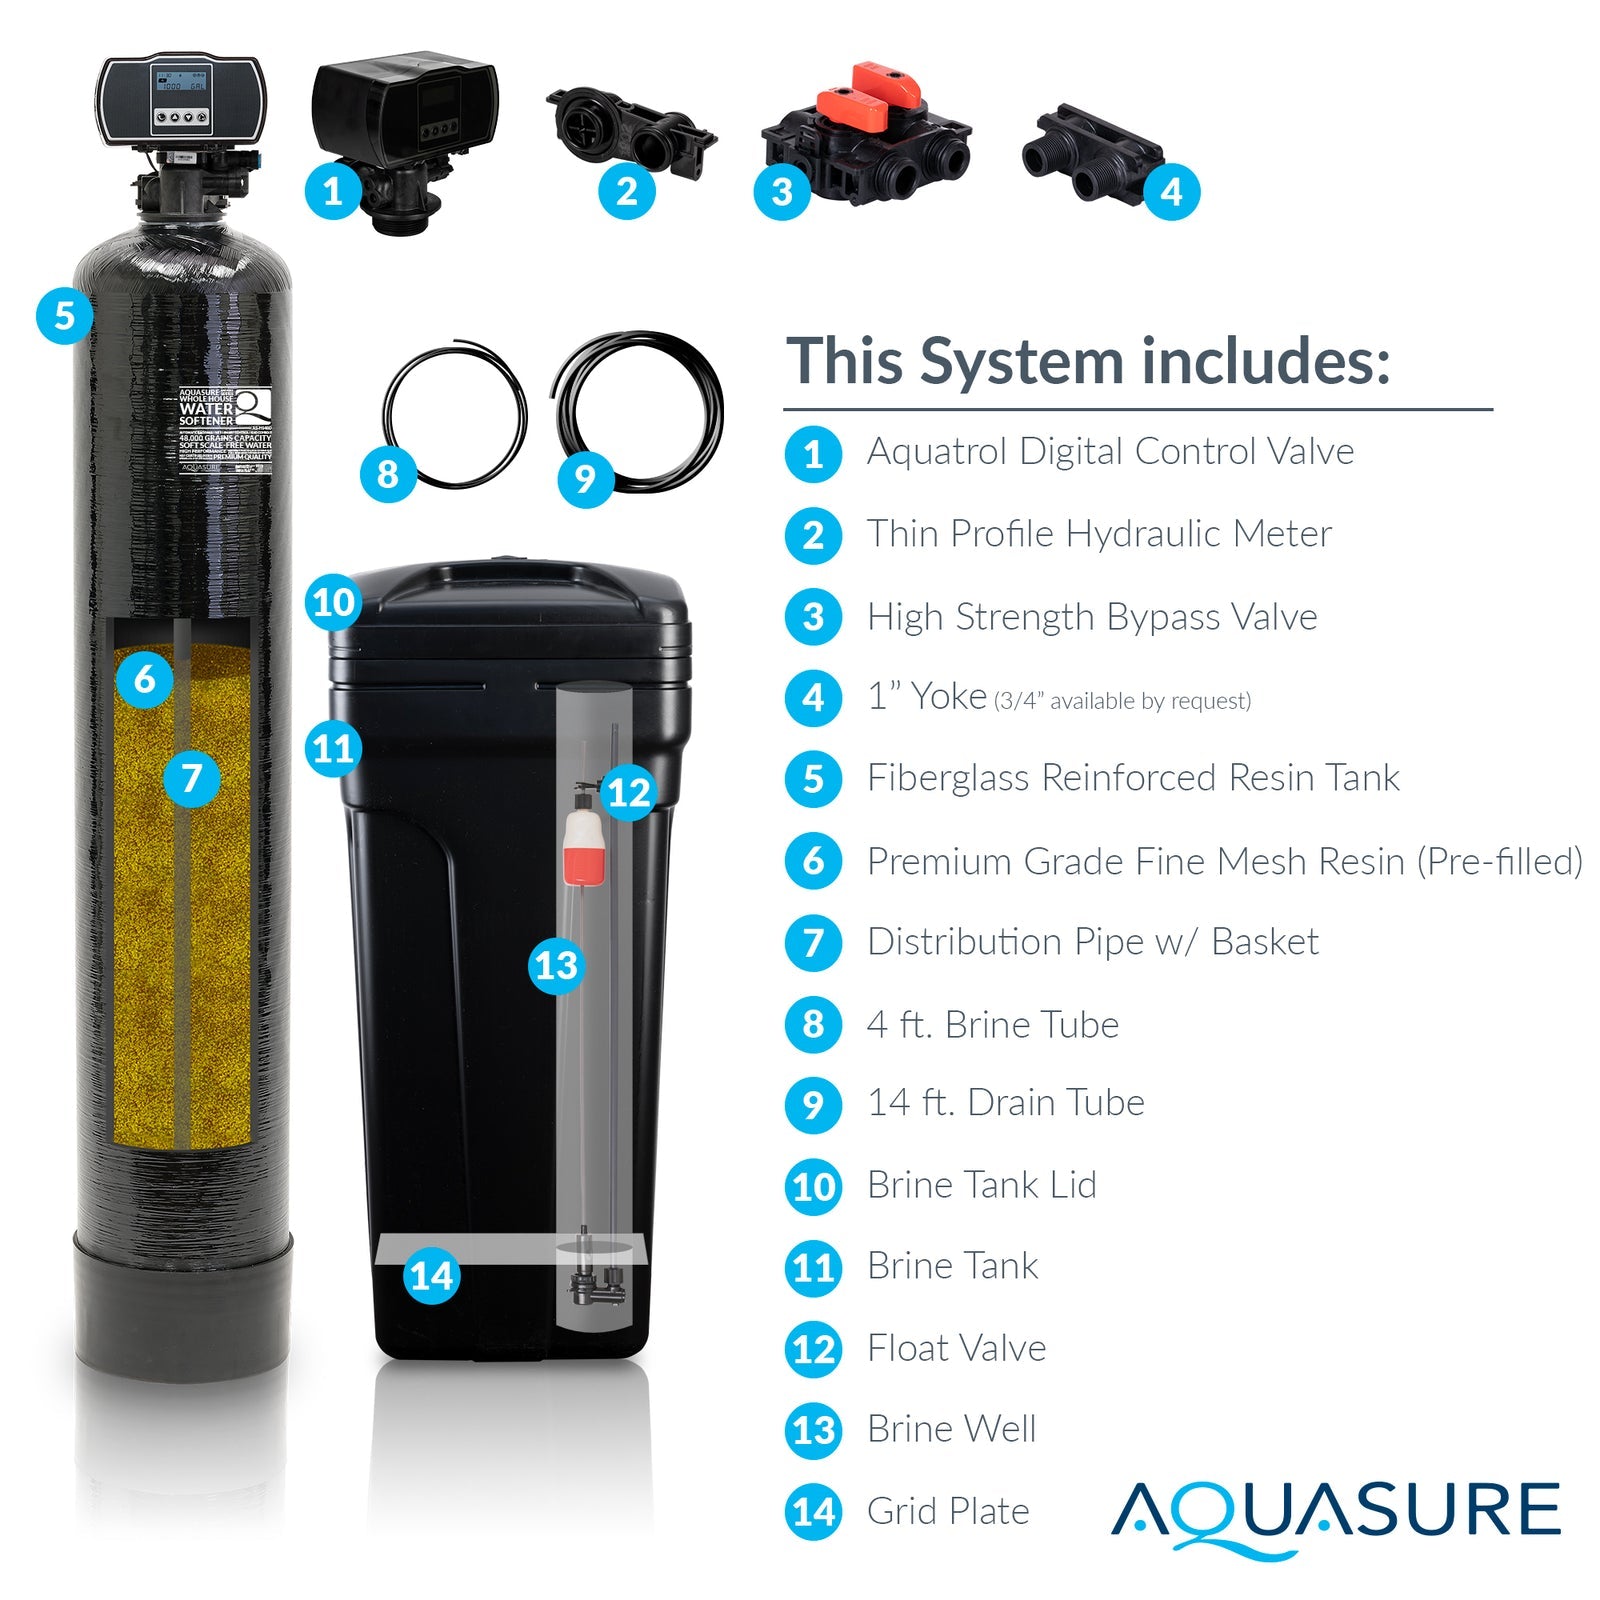 Aquasure, Aquasure AS-HS64FM Harmony Series 64,000 Grain Water Softener with Fine Mesh Resin for Iron Removal New